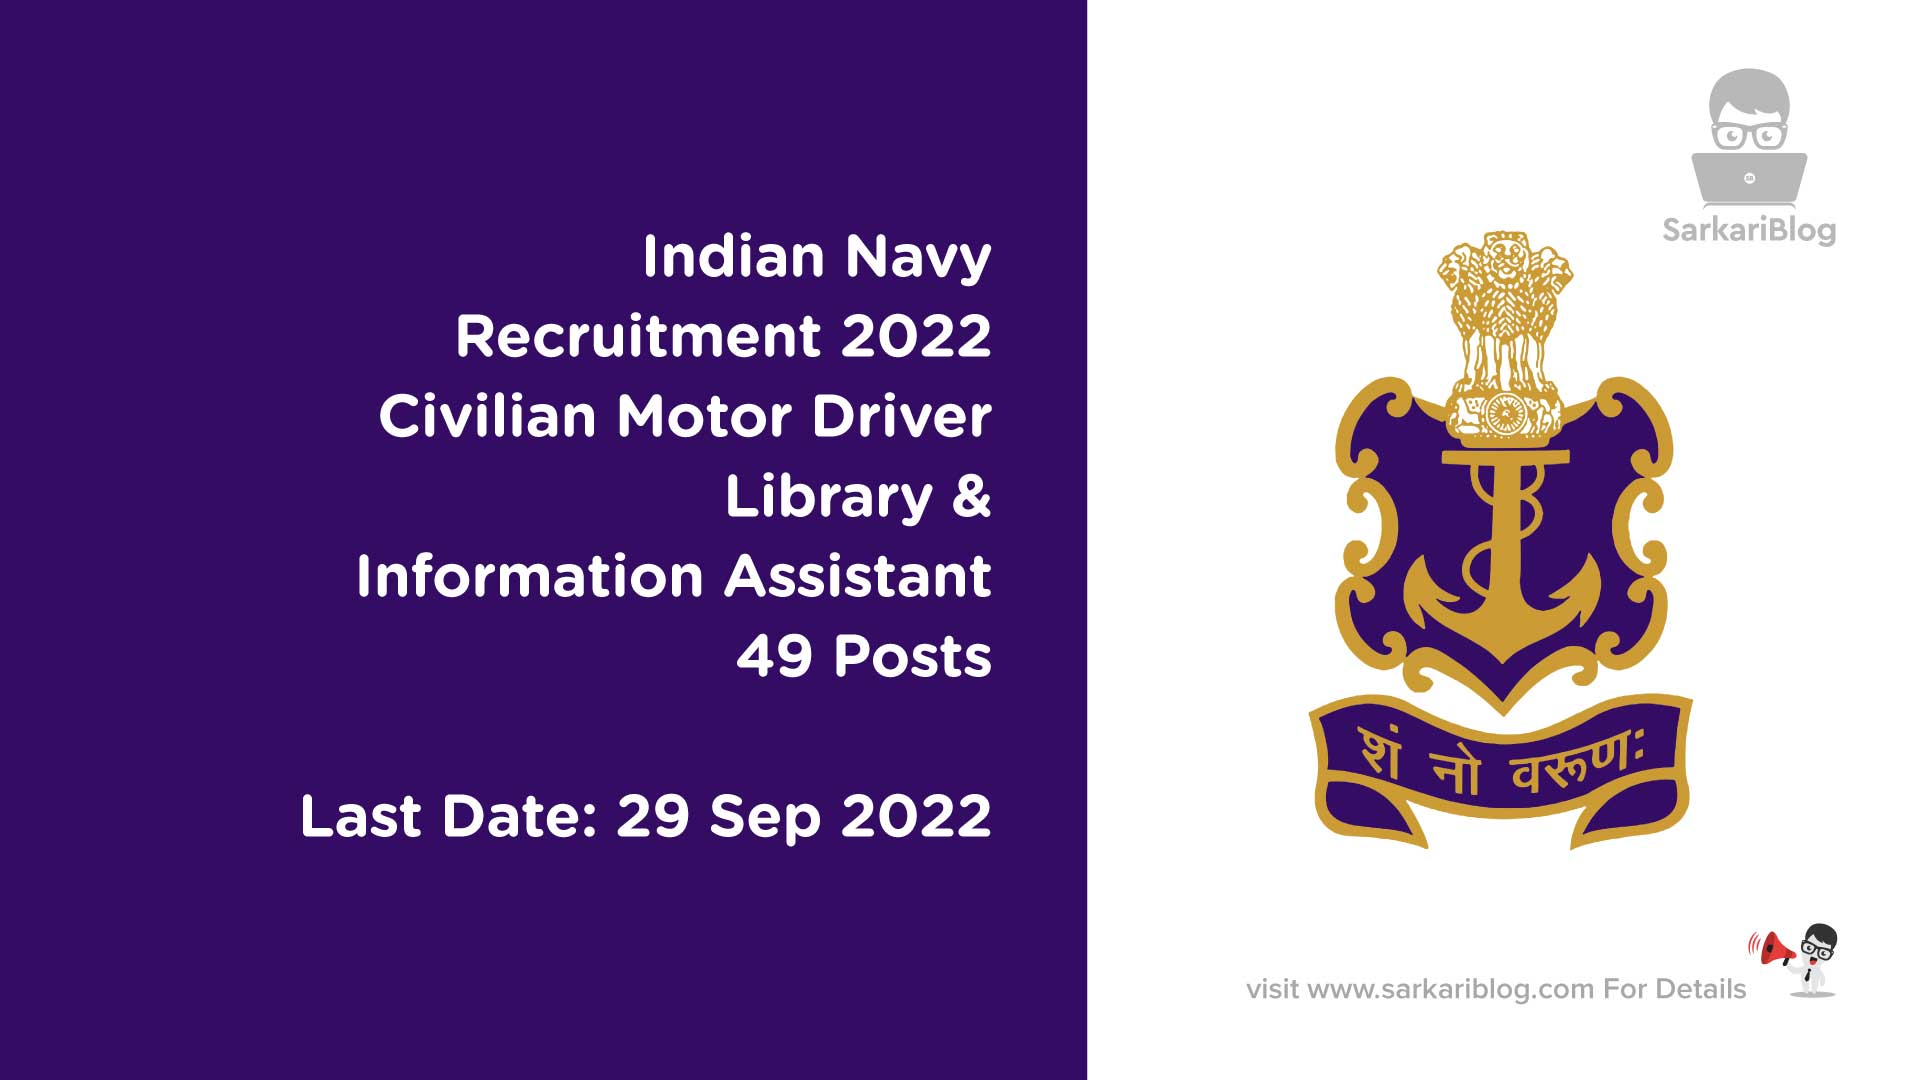 Indian Navy Recruitment 2022 | 49 Civilian Motor Driver, Library & Information Assistant